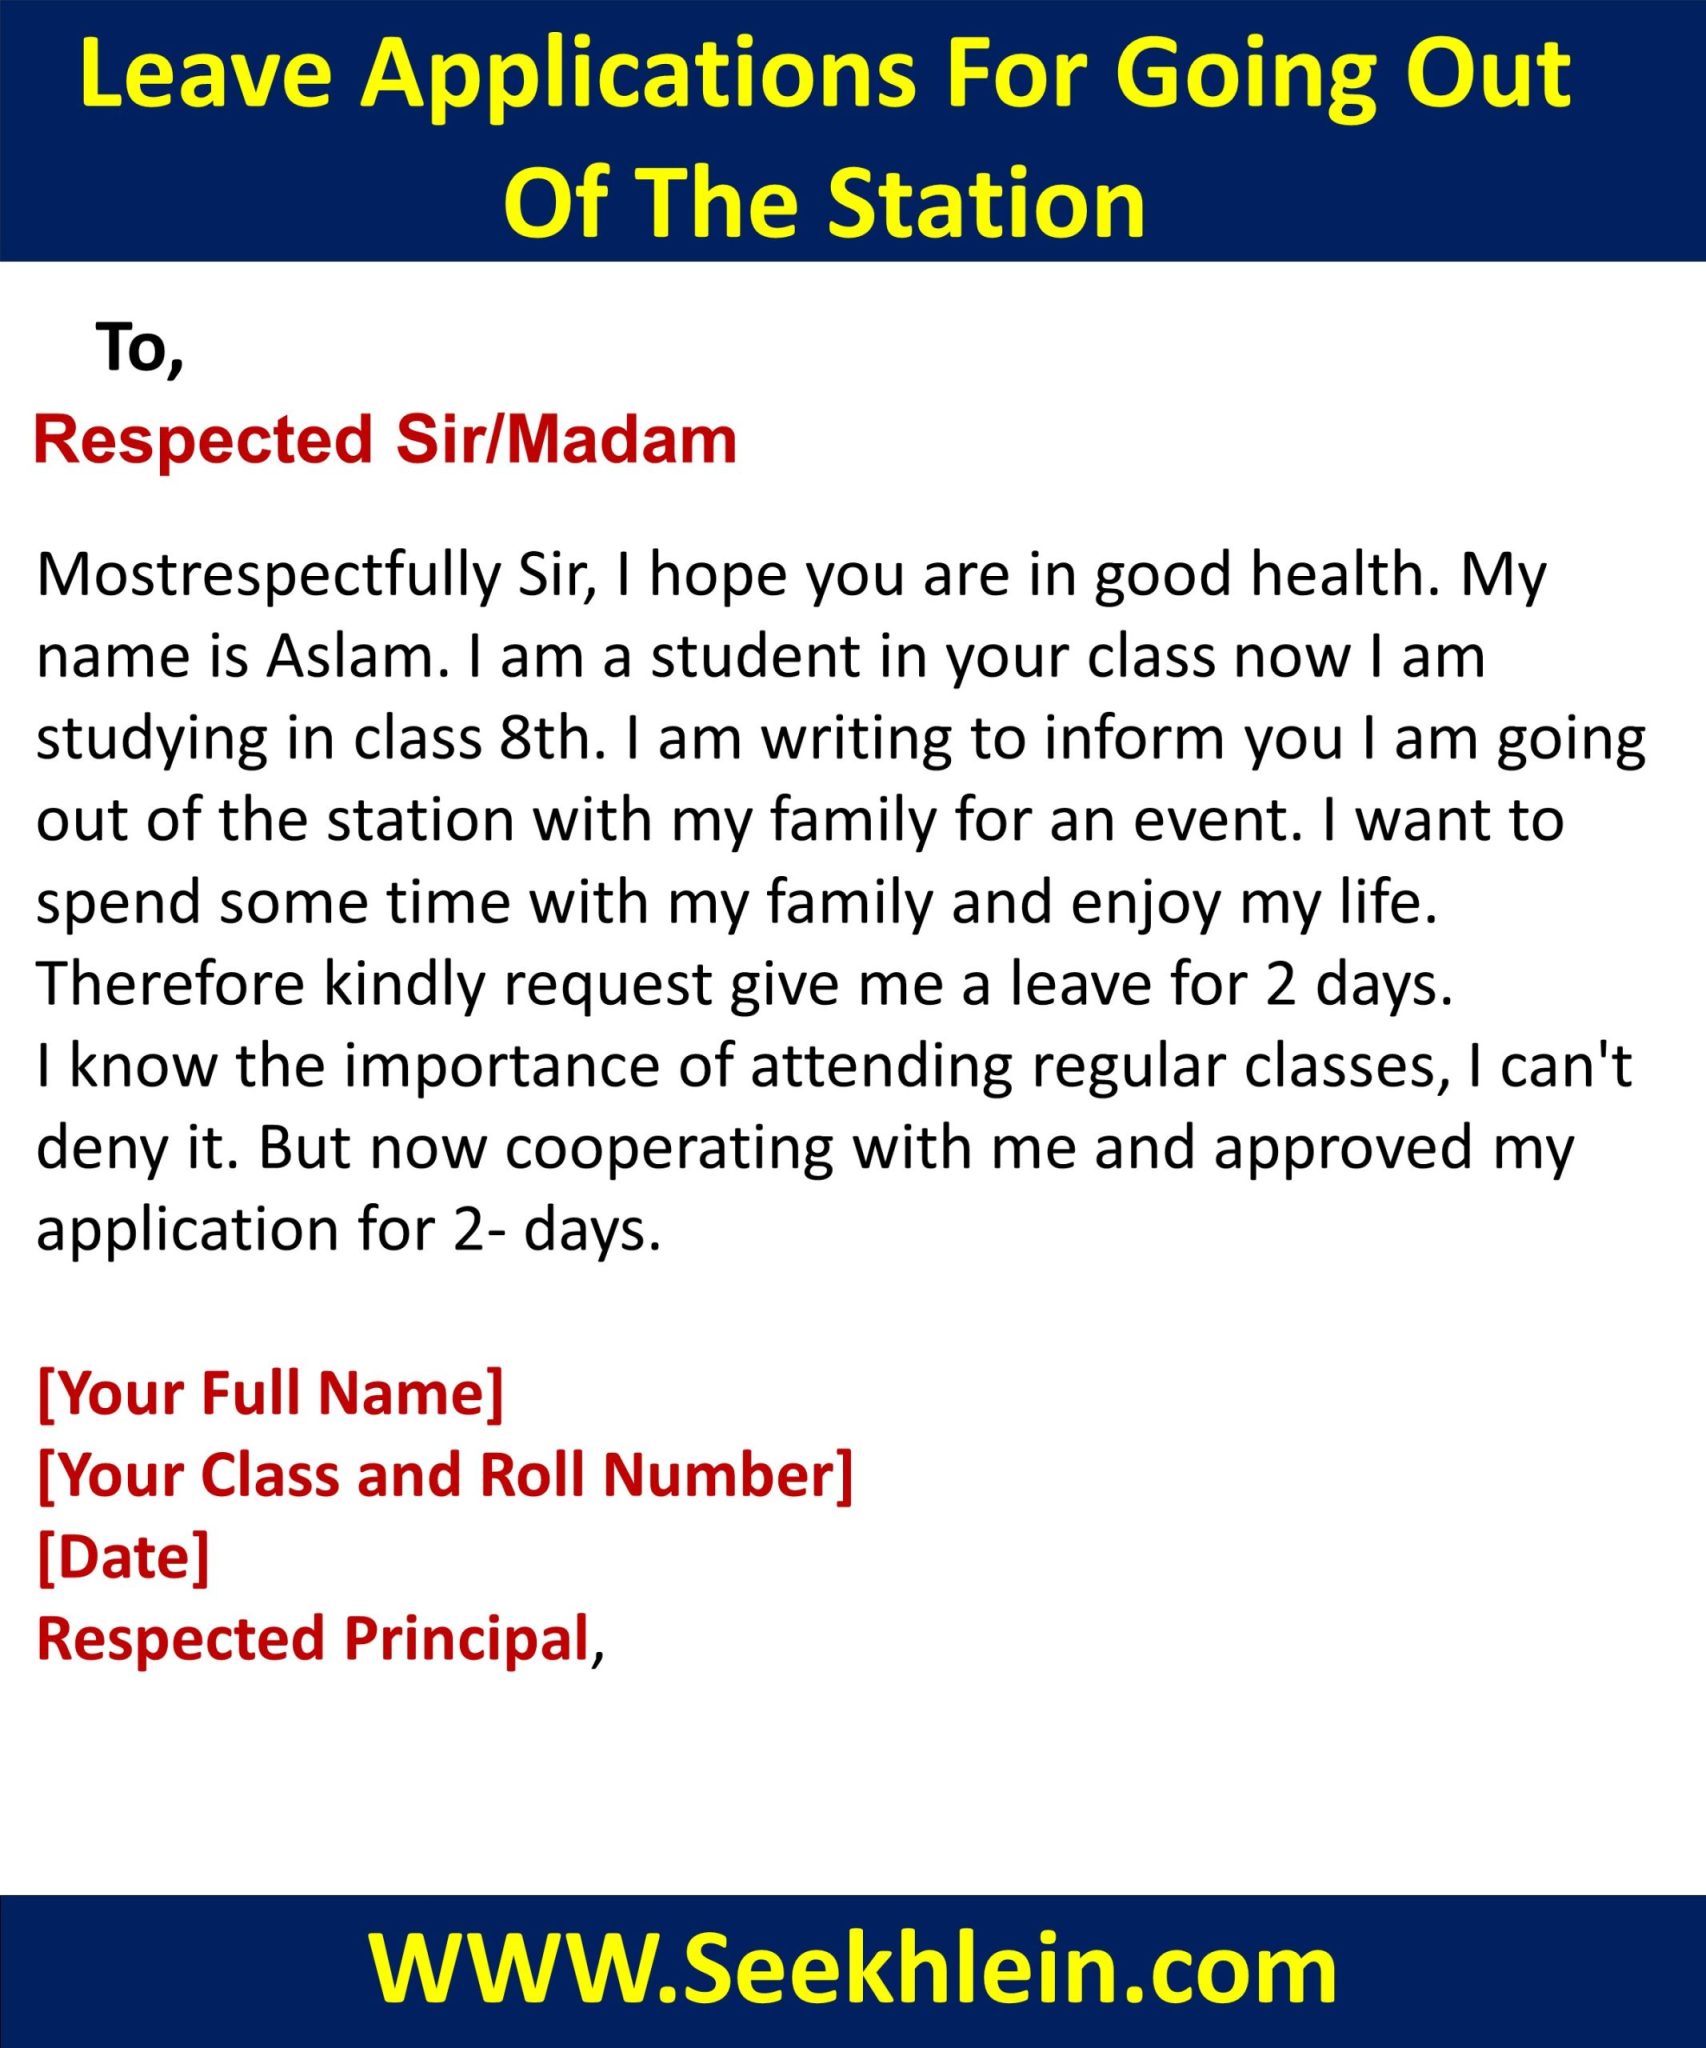 2 -Days Leave Application To Principal For Going Out Of Station